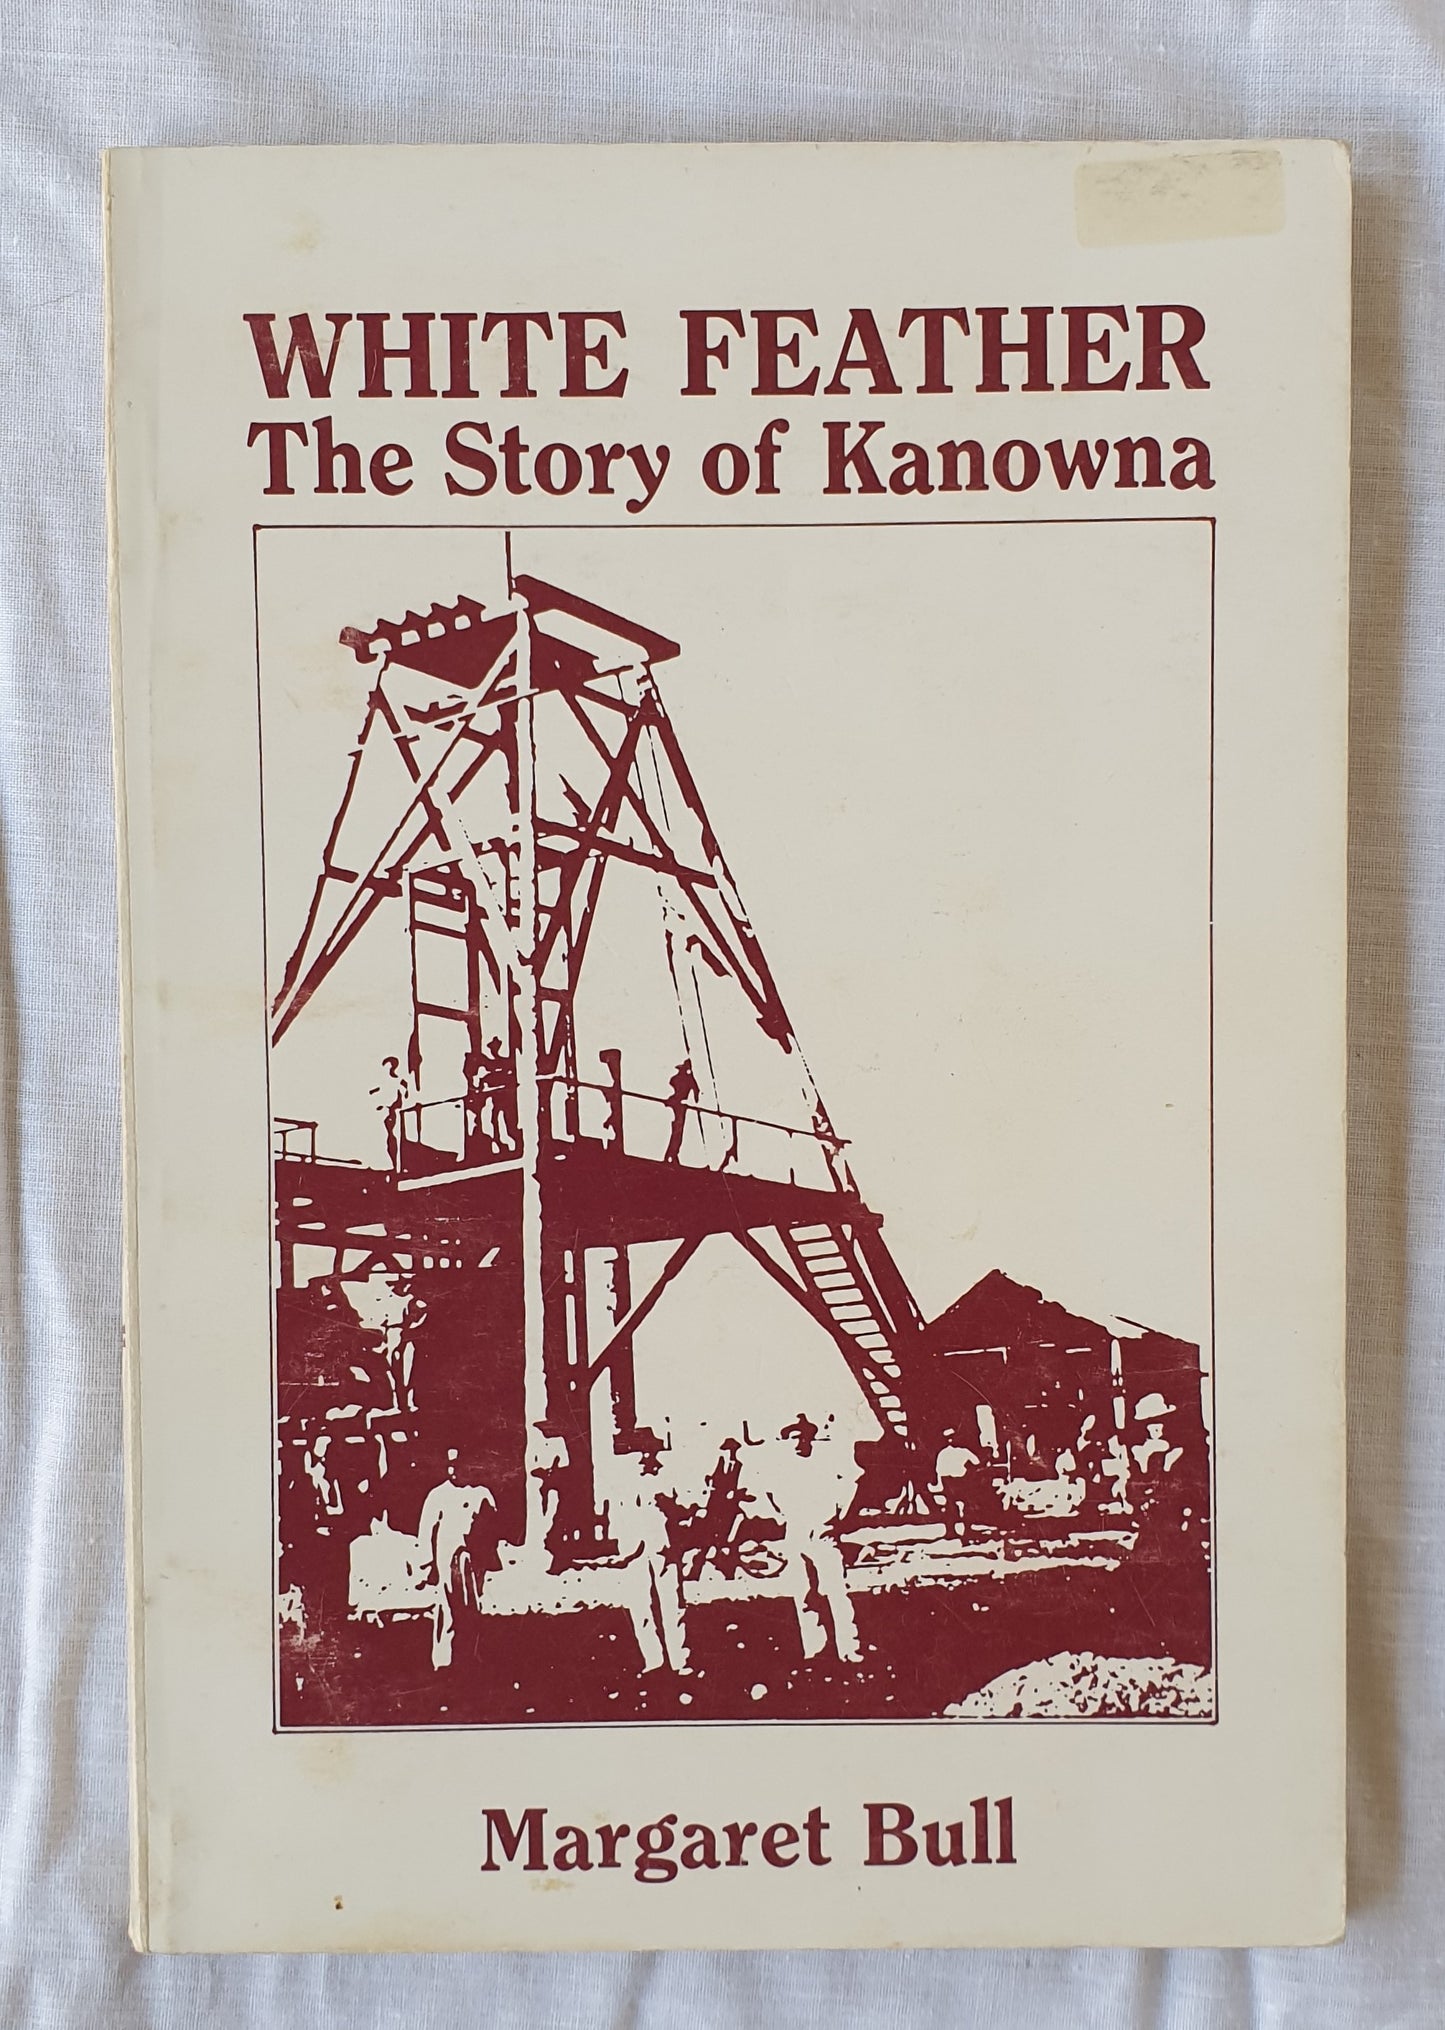 White Feather The Story of Kanowna by Margaret Bull